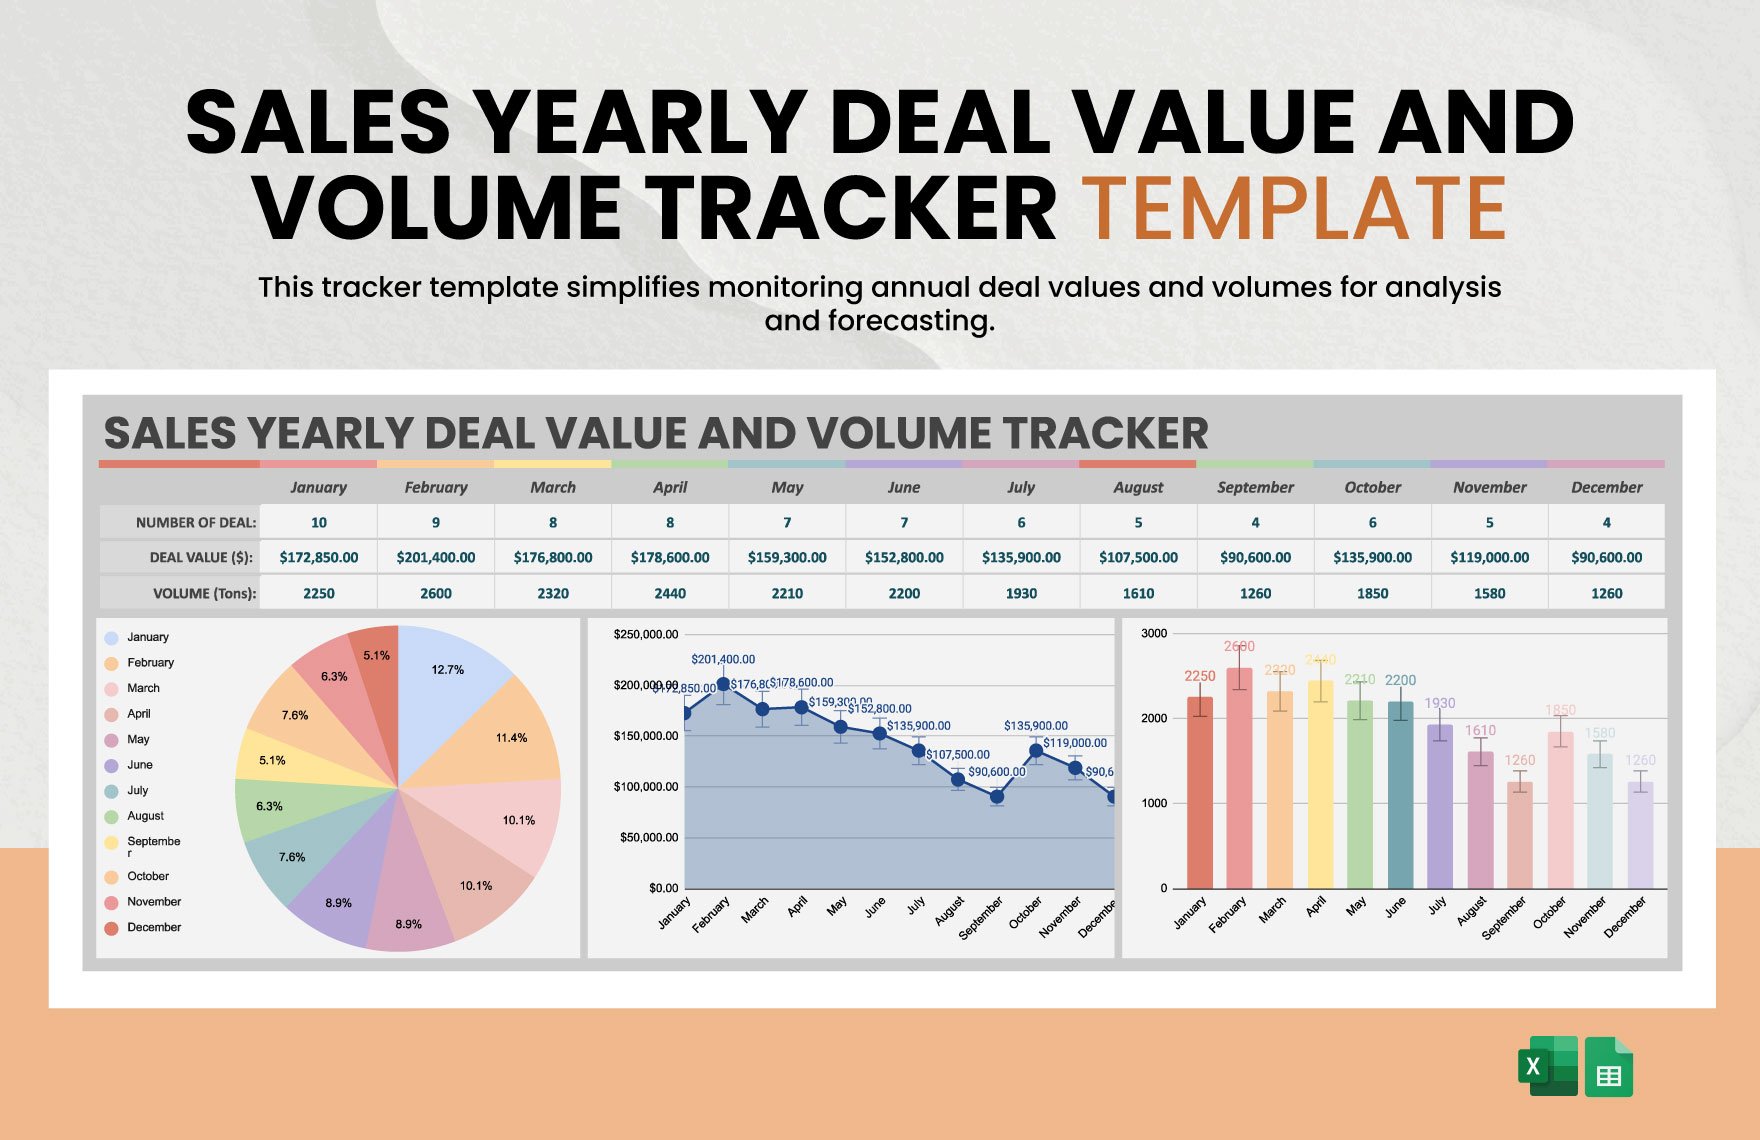 Sales Yearly Deal Value and Volume Tracker Template